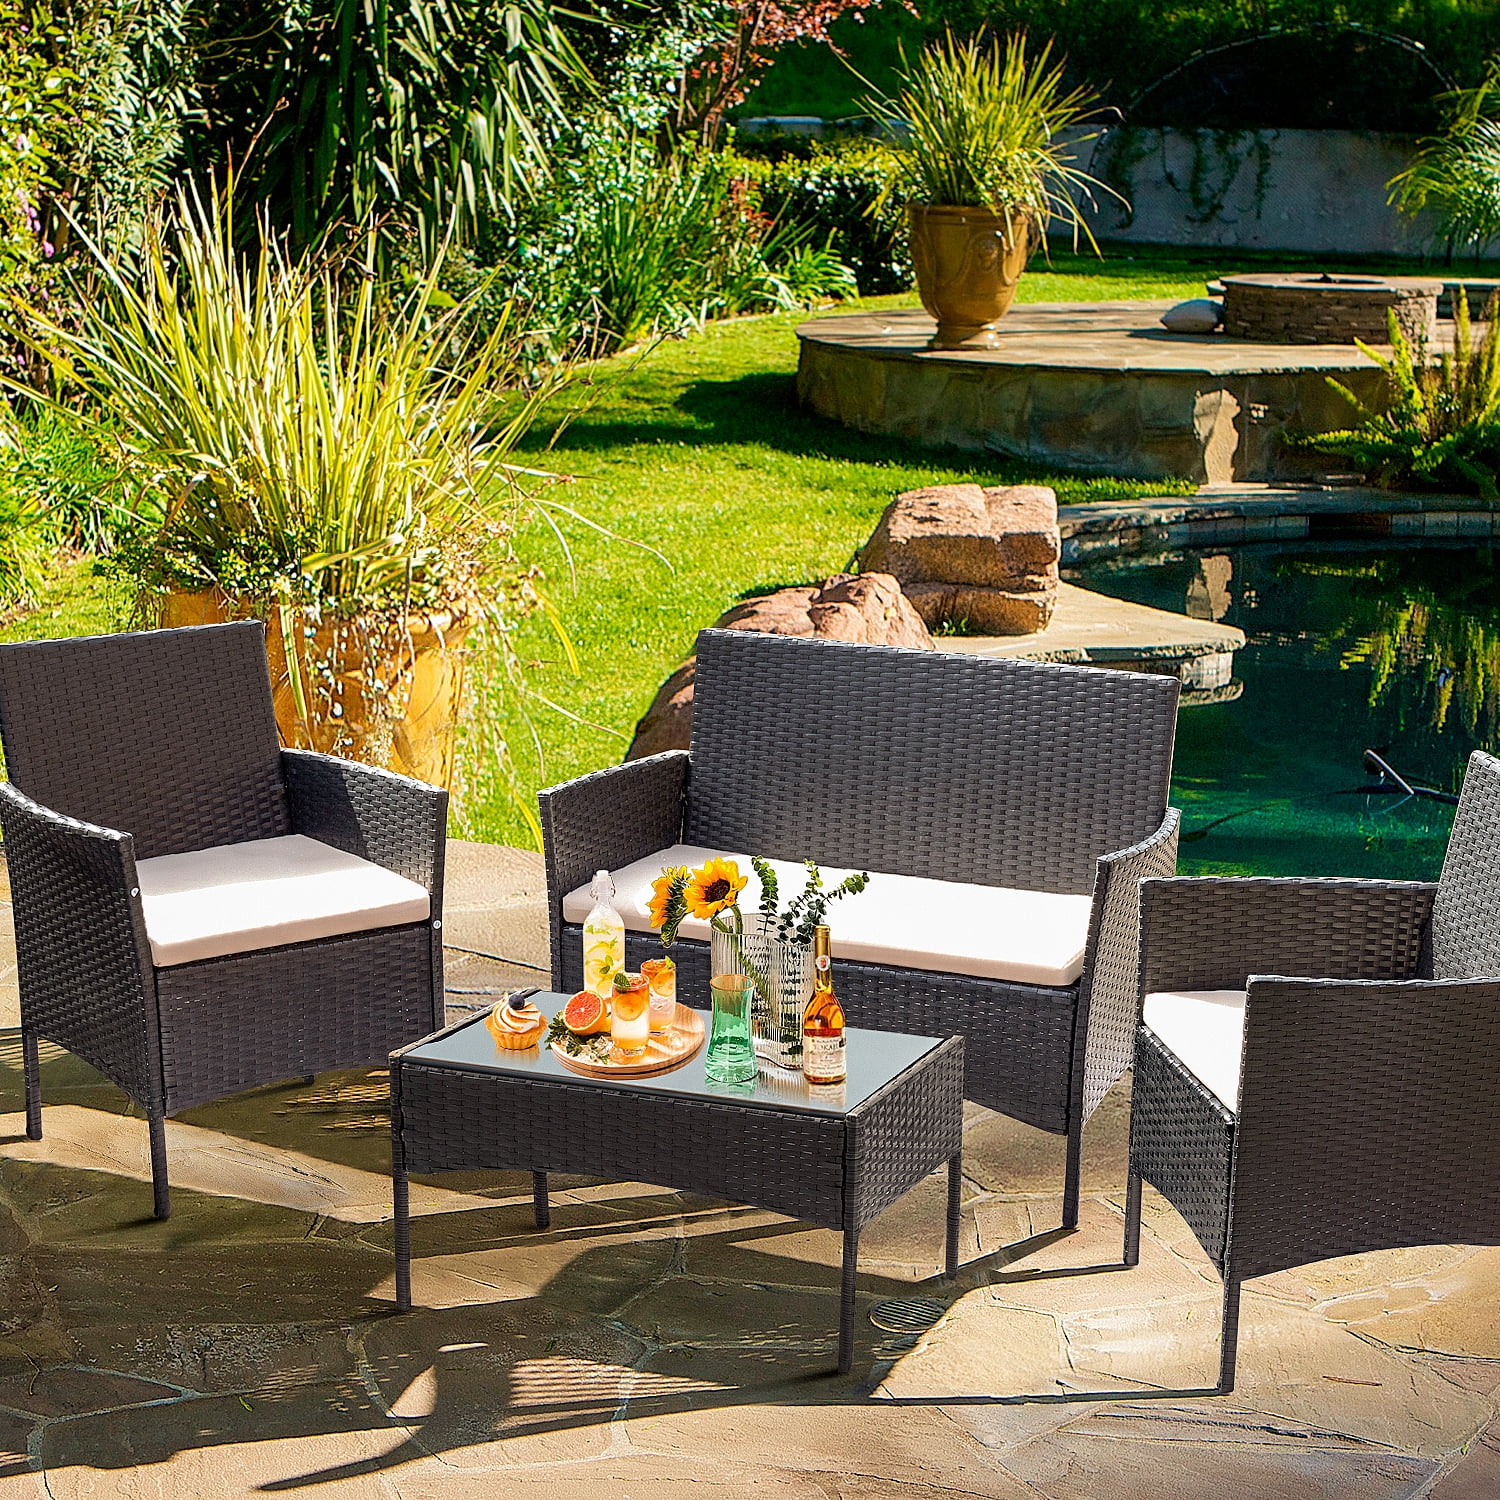 Lacoo 4 Piece Outdoor Patio Furniture PE Rattan Wicker Table and Chairs Set, Beige - image 1 of 7